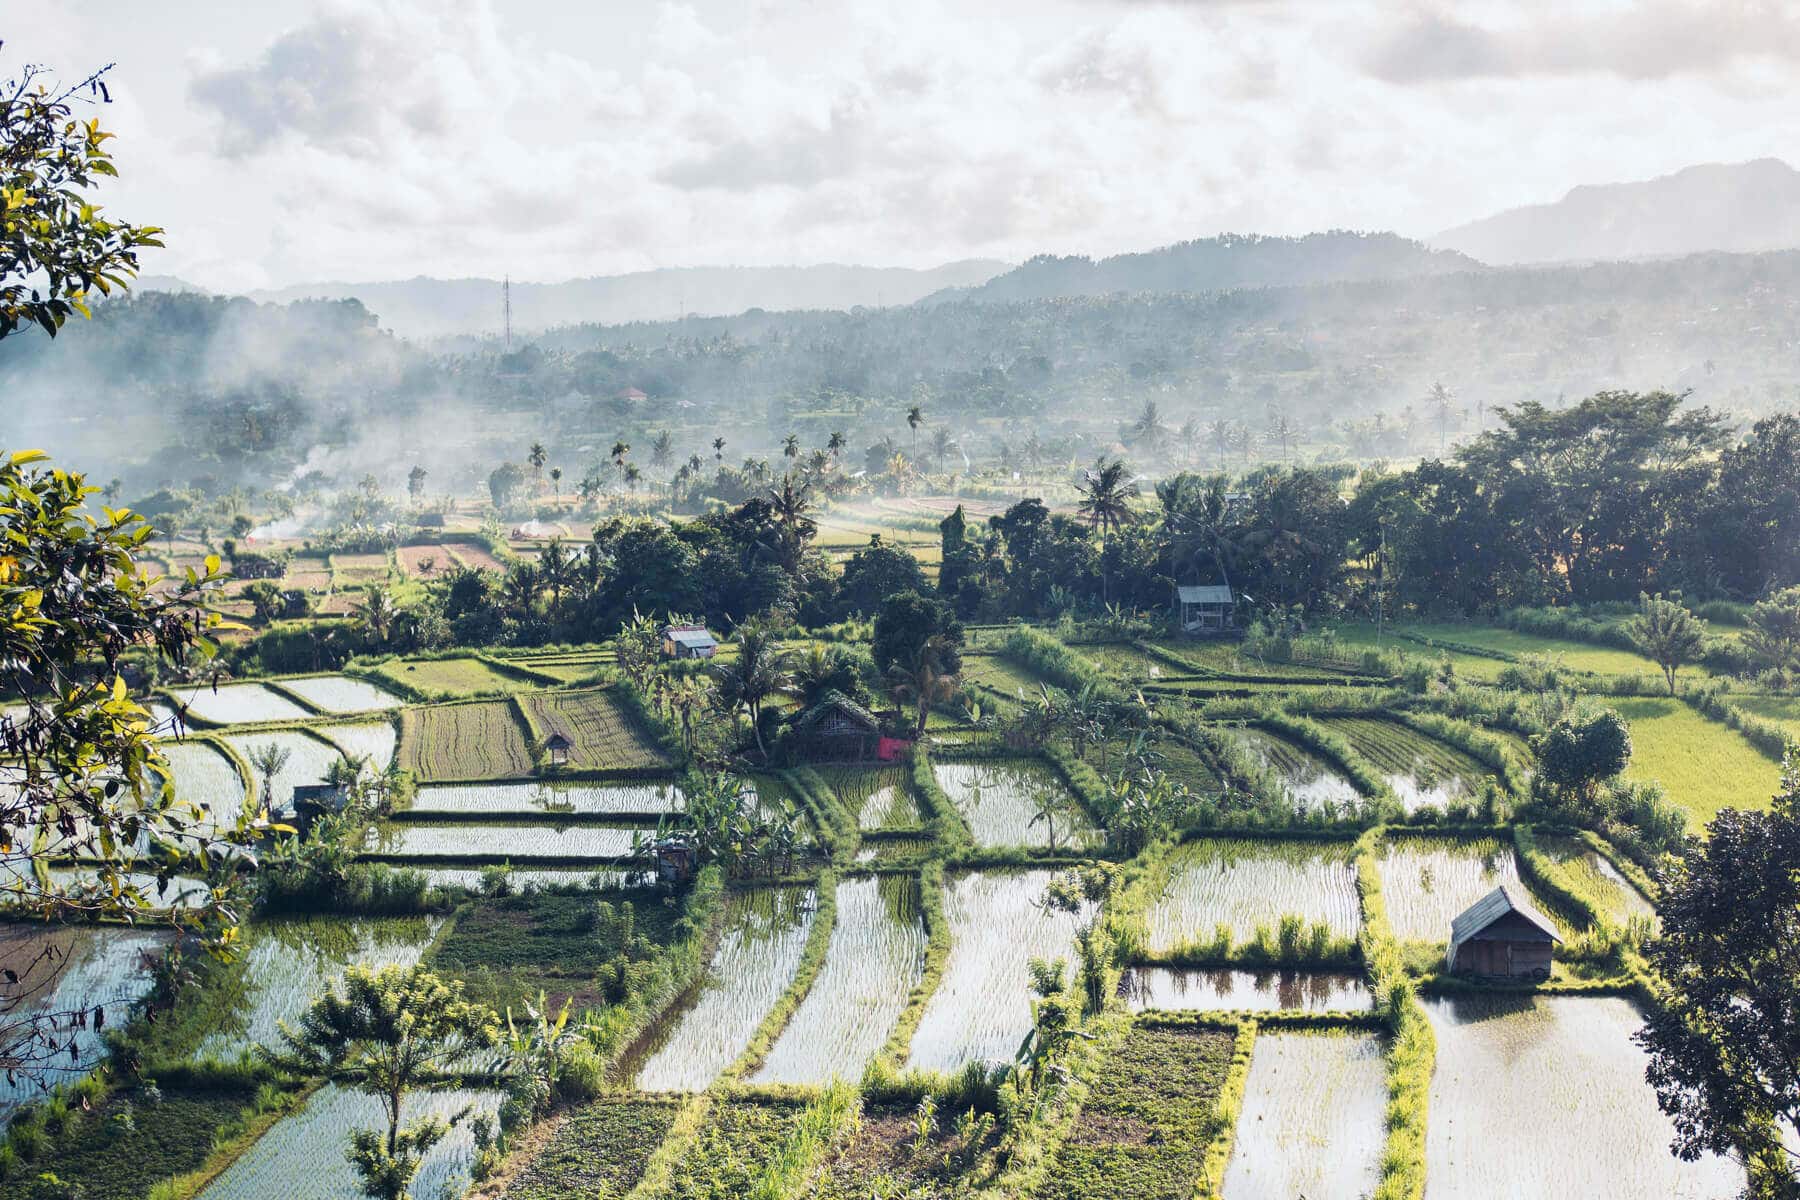 View from our balcony in East Bali over green rice fields standing in water with misty mountains in the background.